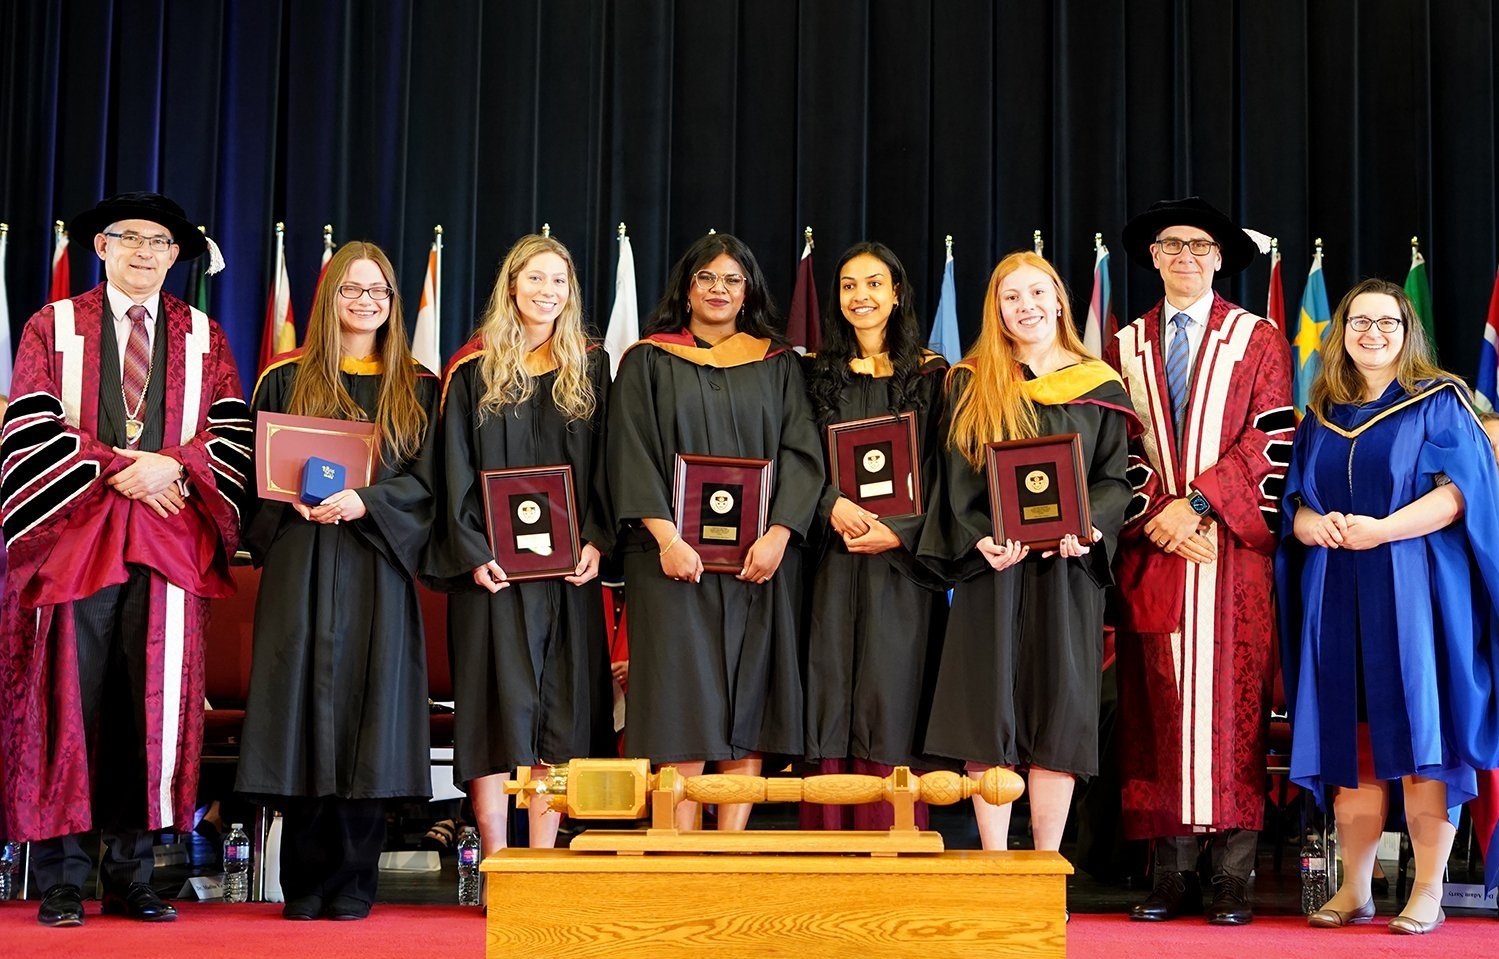  President Summerby-Murray, Chancellor Durland, Dean Francis with Science Gold Medal winners and Governor General’s Medal winner 